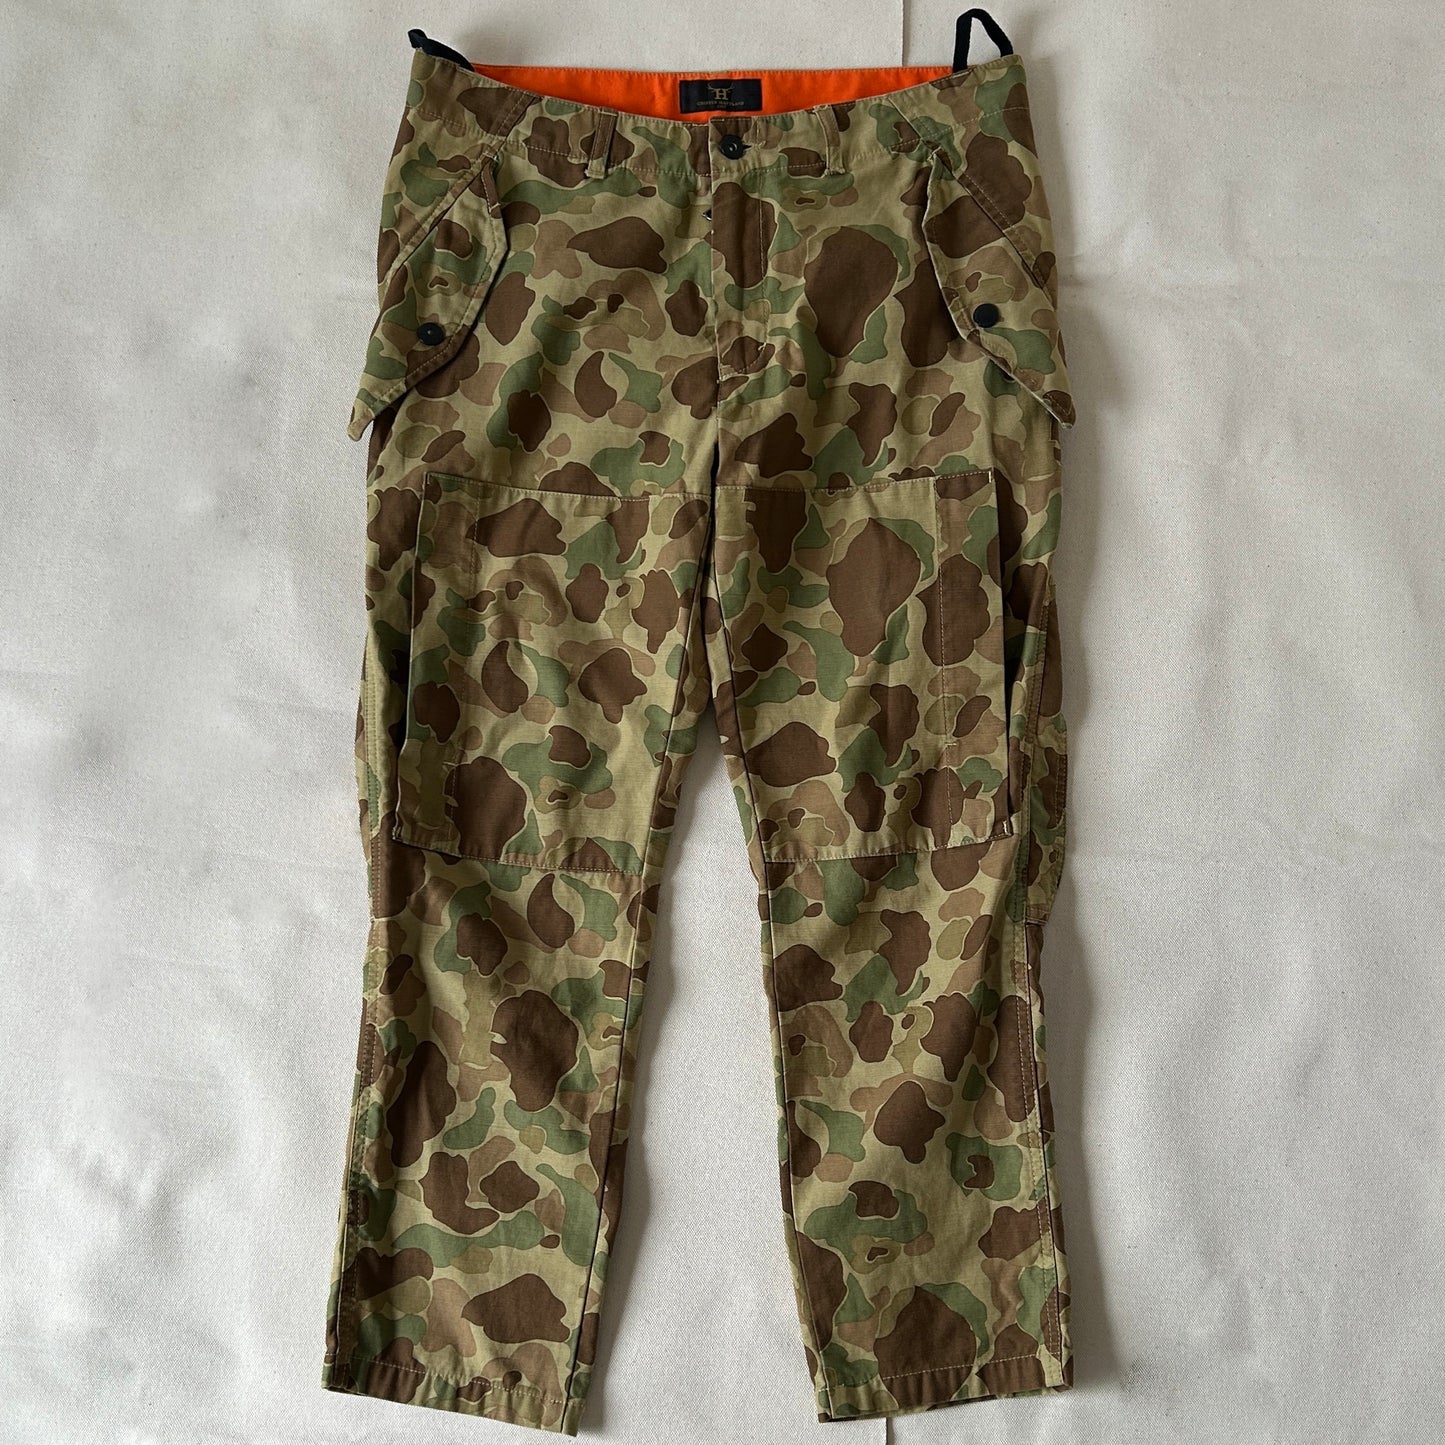 Griffin Camo pattern cargo pants